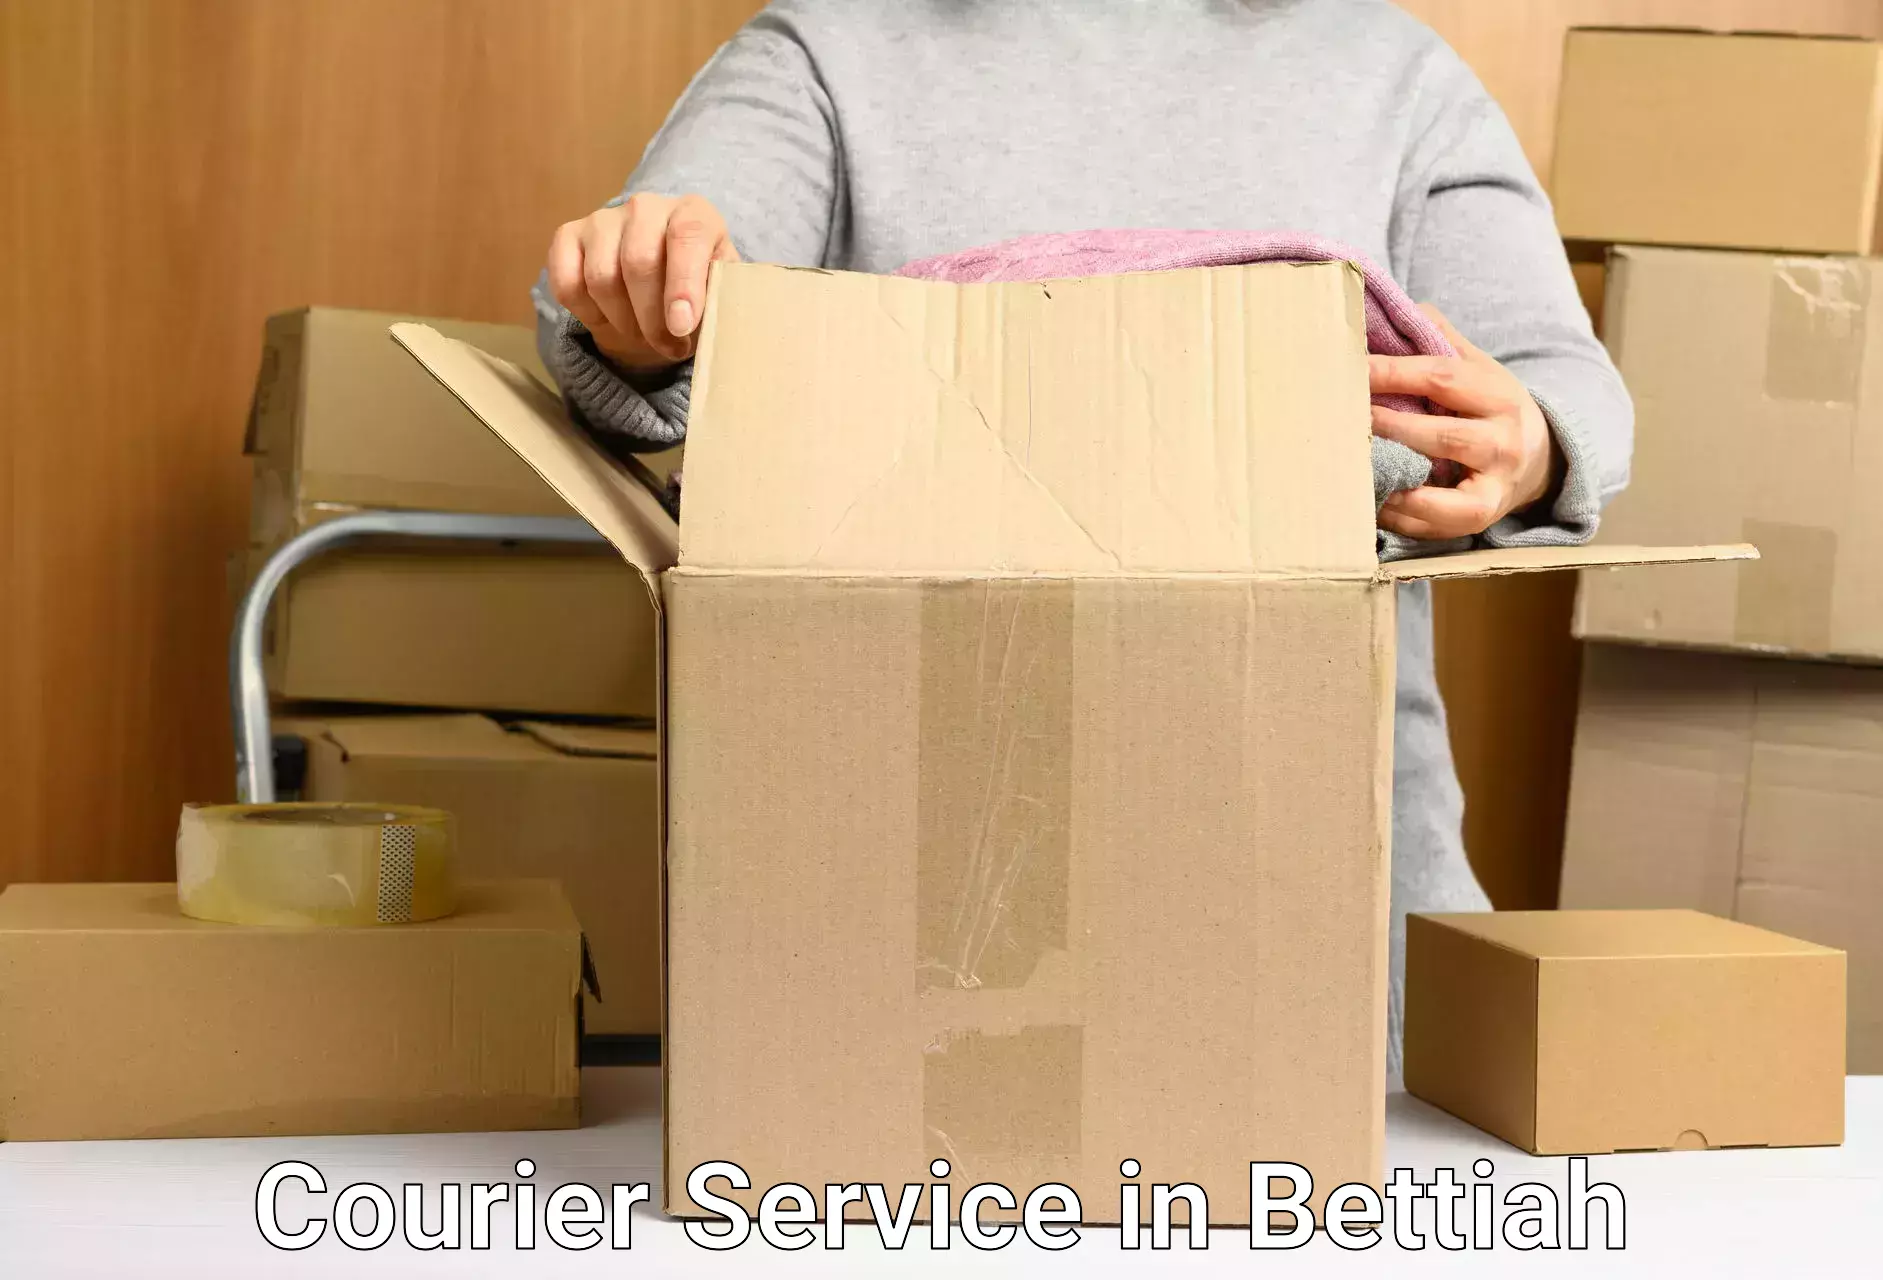 Wholesale parcel delivery in Bettiah